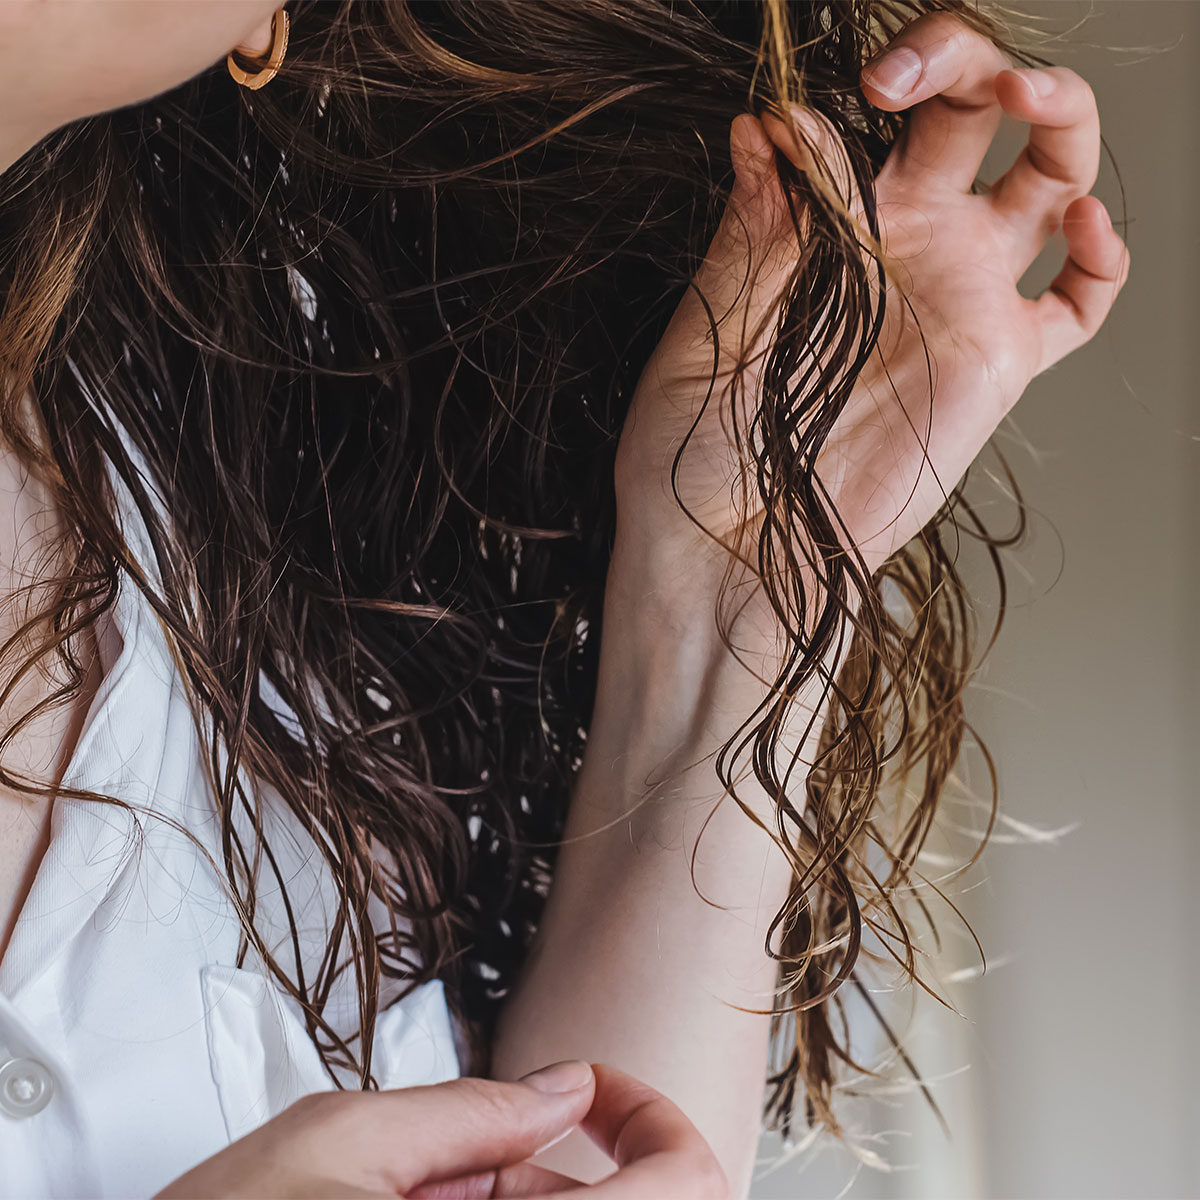 The Worst Haircut For Curly, Thinning Hair, According To Experts